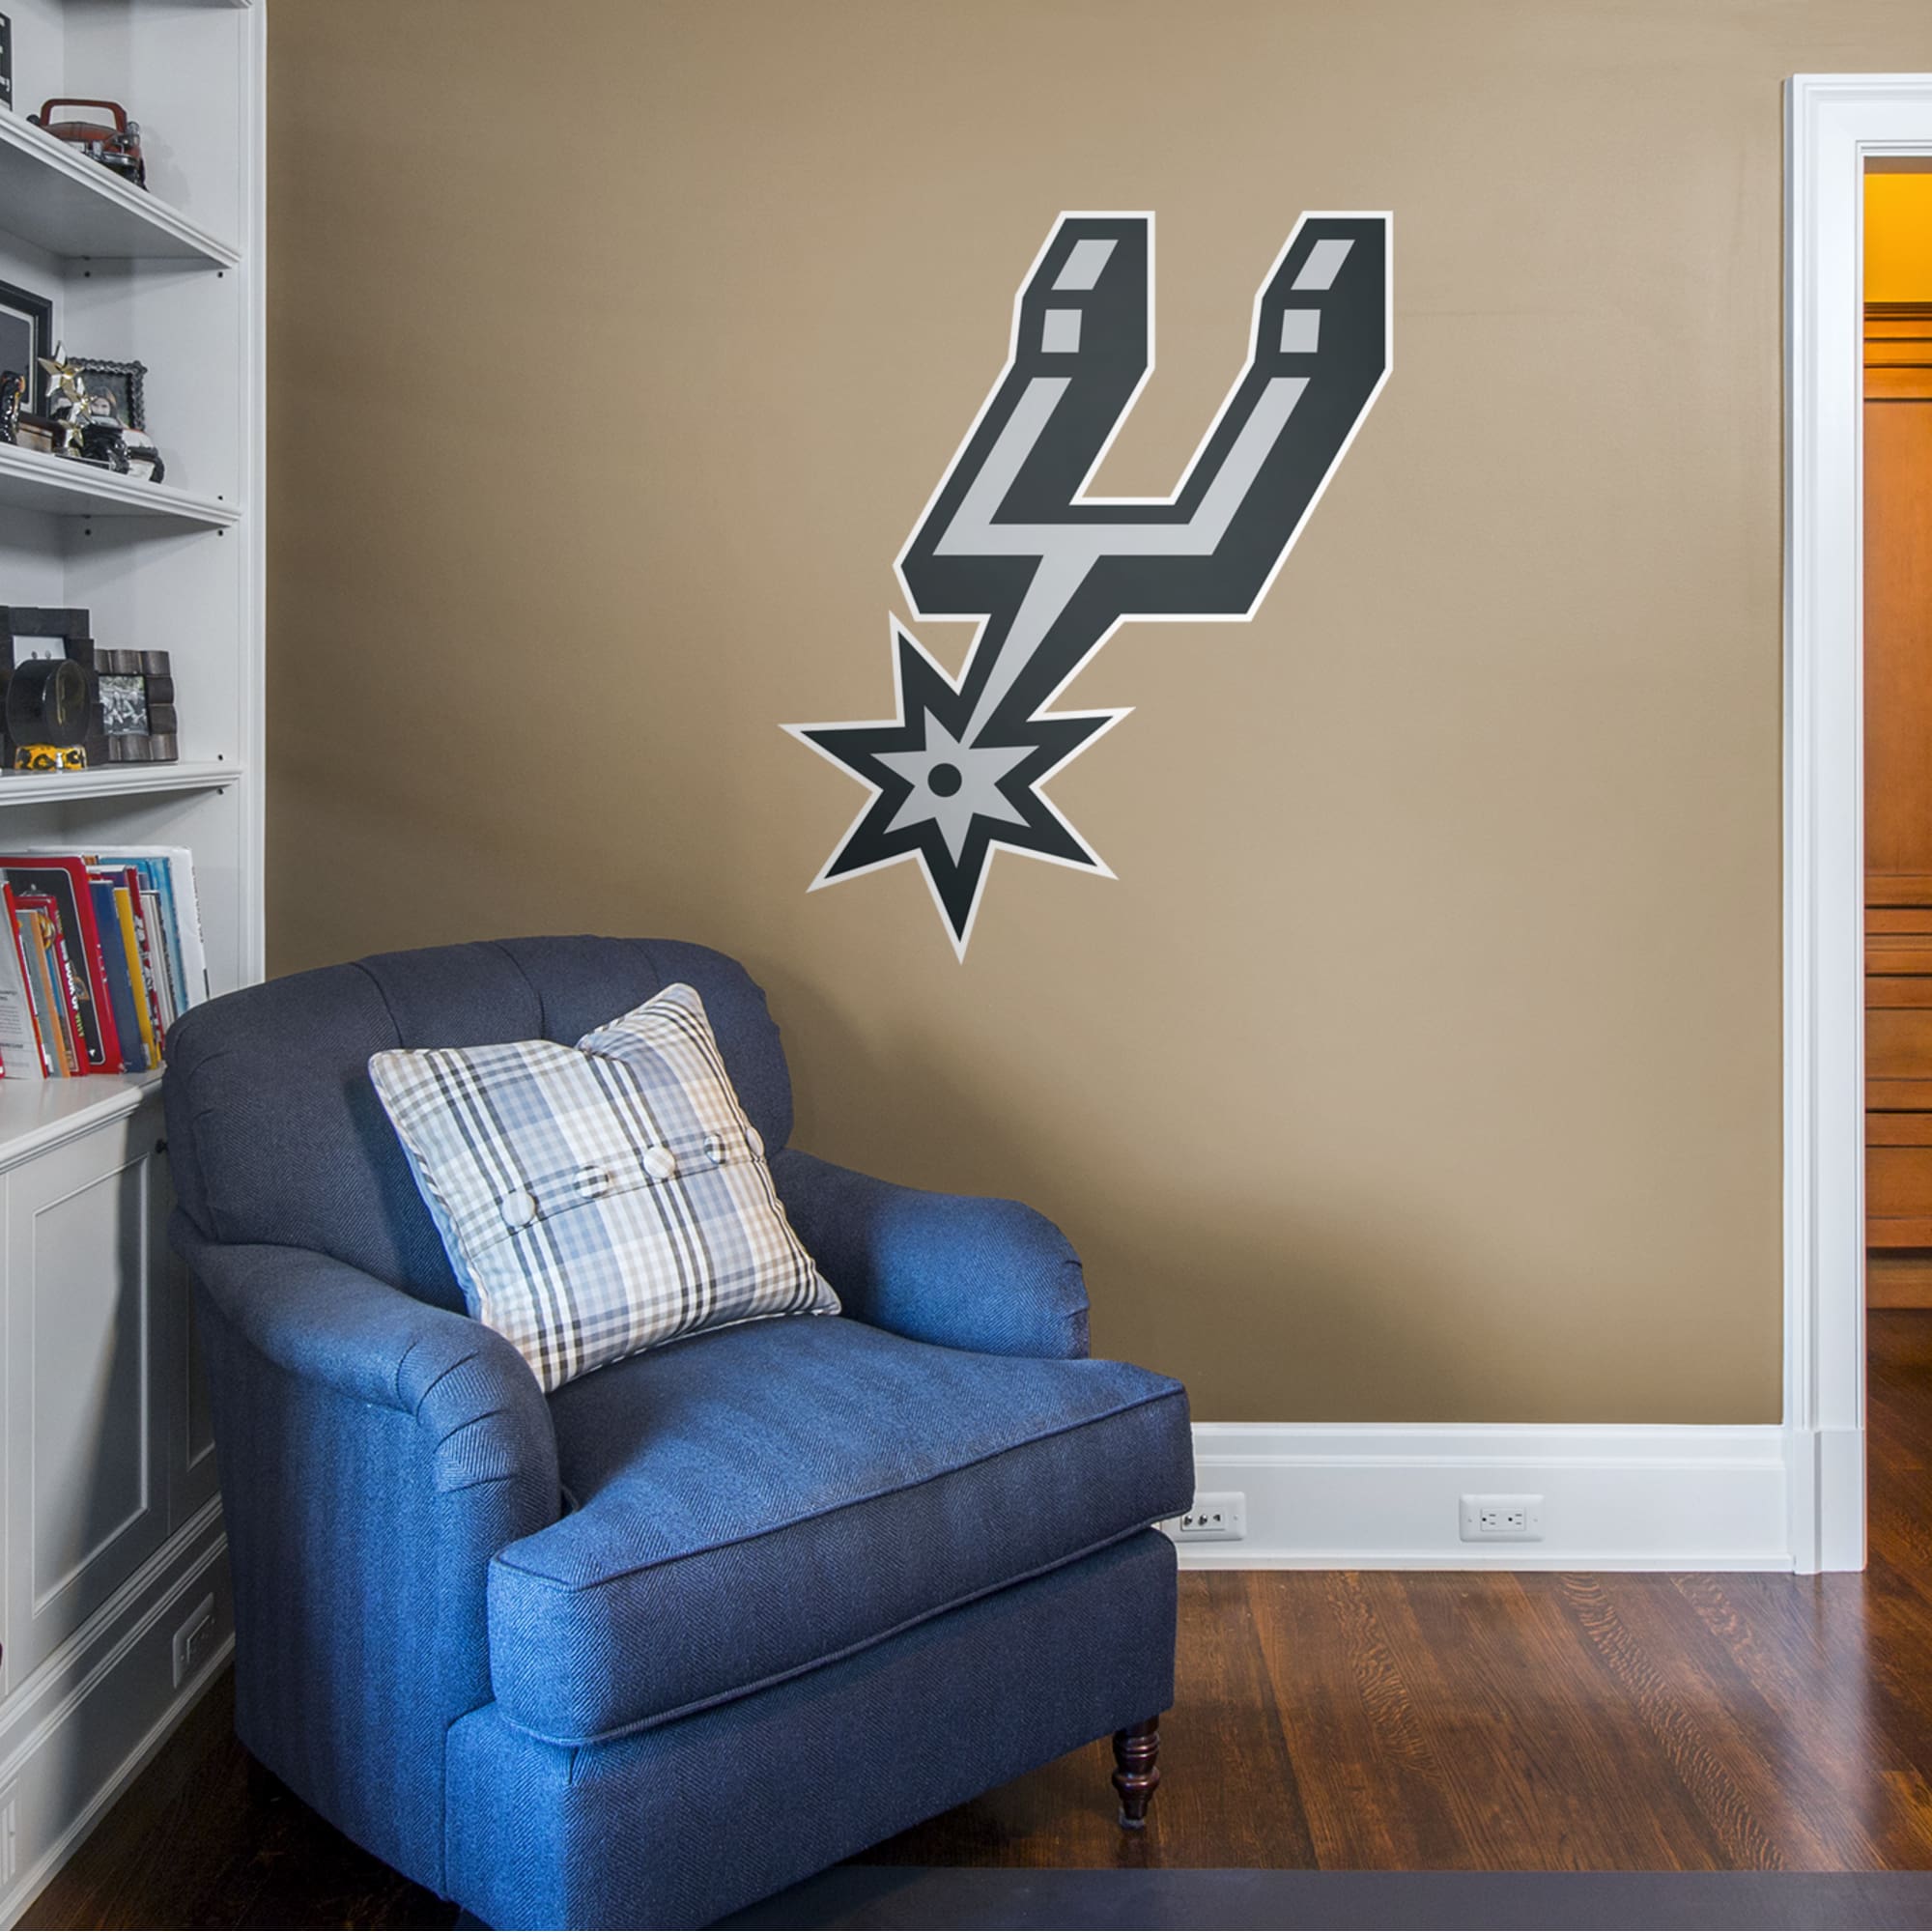 San Antonio Spurs: Logo - Officially Licensed NBA Removable Wall Decal Giant Logo (39"W x 47"H) by Fathead | Vinyl